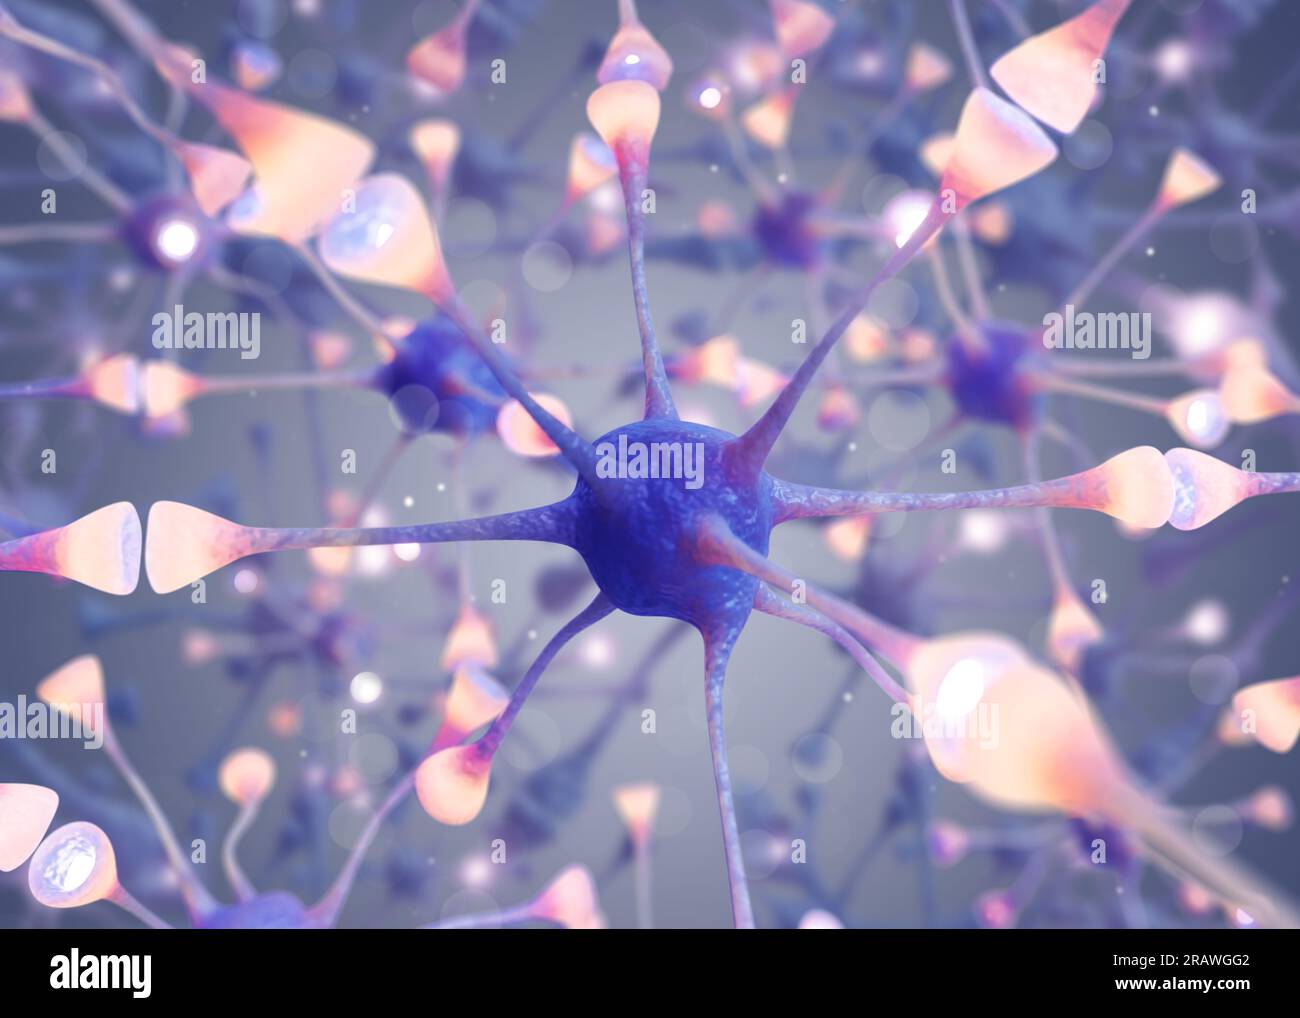 Neural network with synaptic connections on grey background, illustration Stock Photo